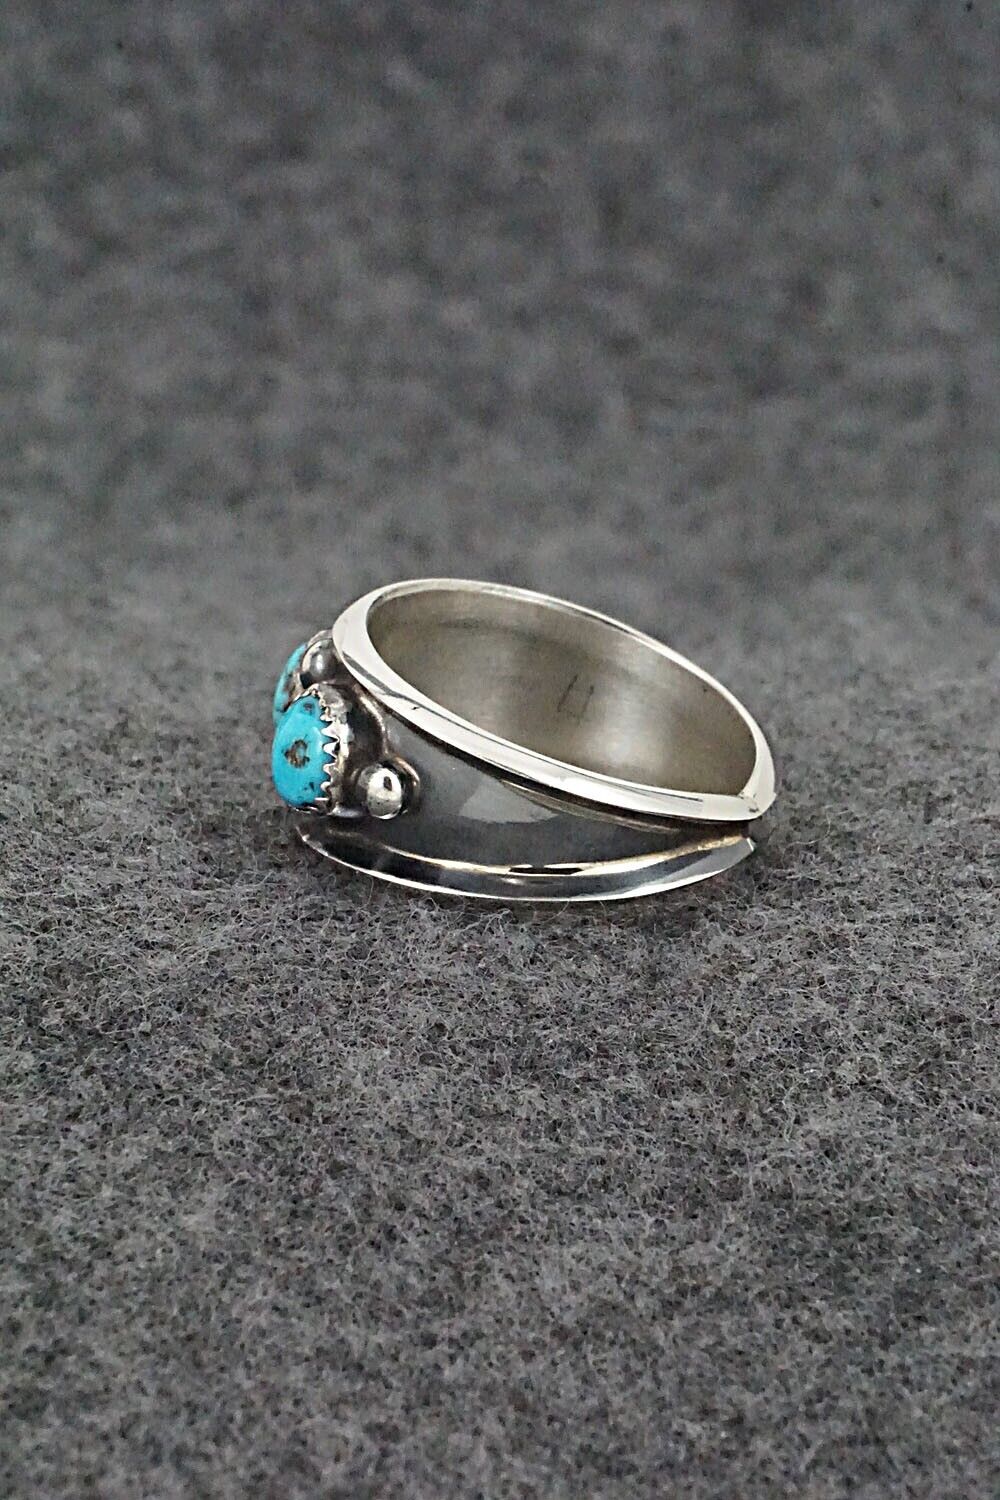 Turquoise & Sterling Silver Ring - Paul Largo - Size 10.5